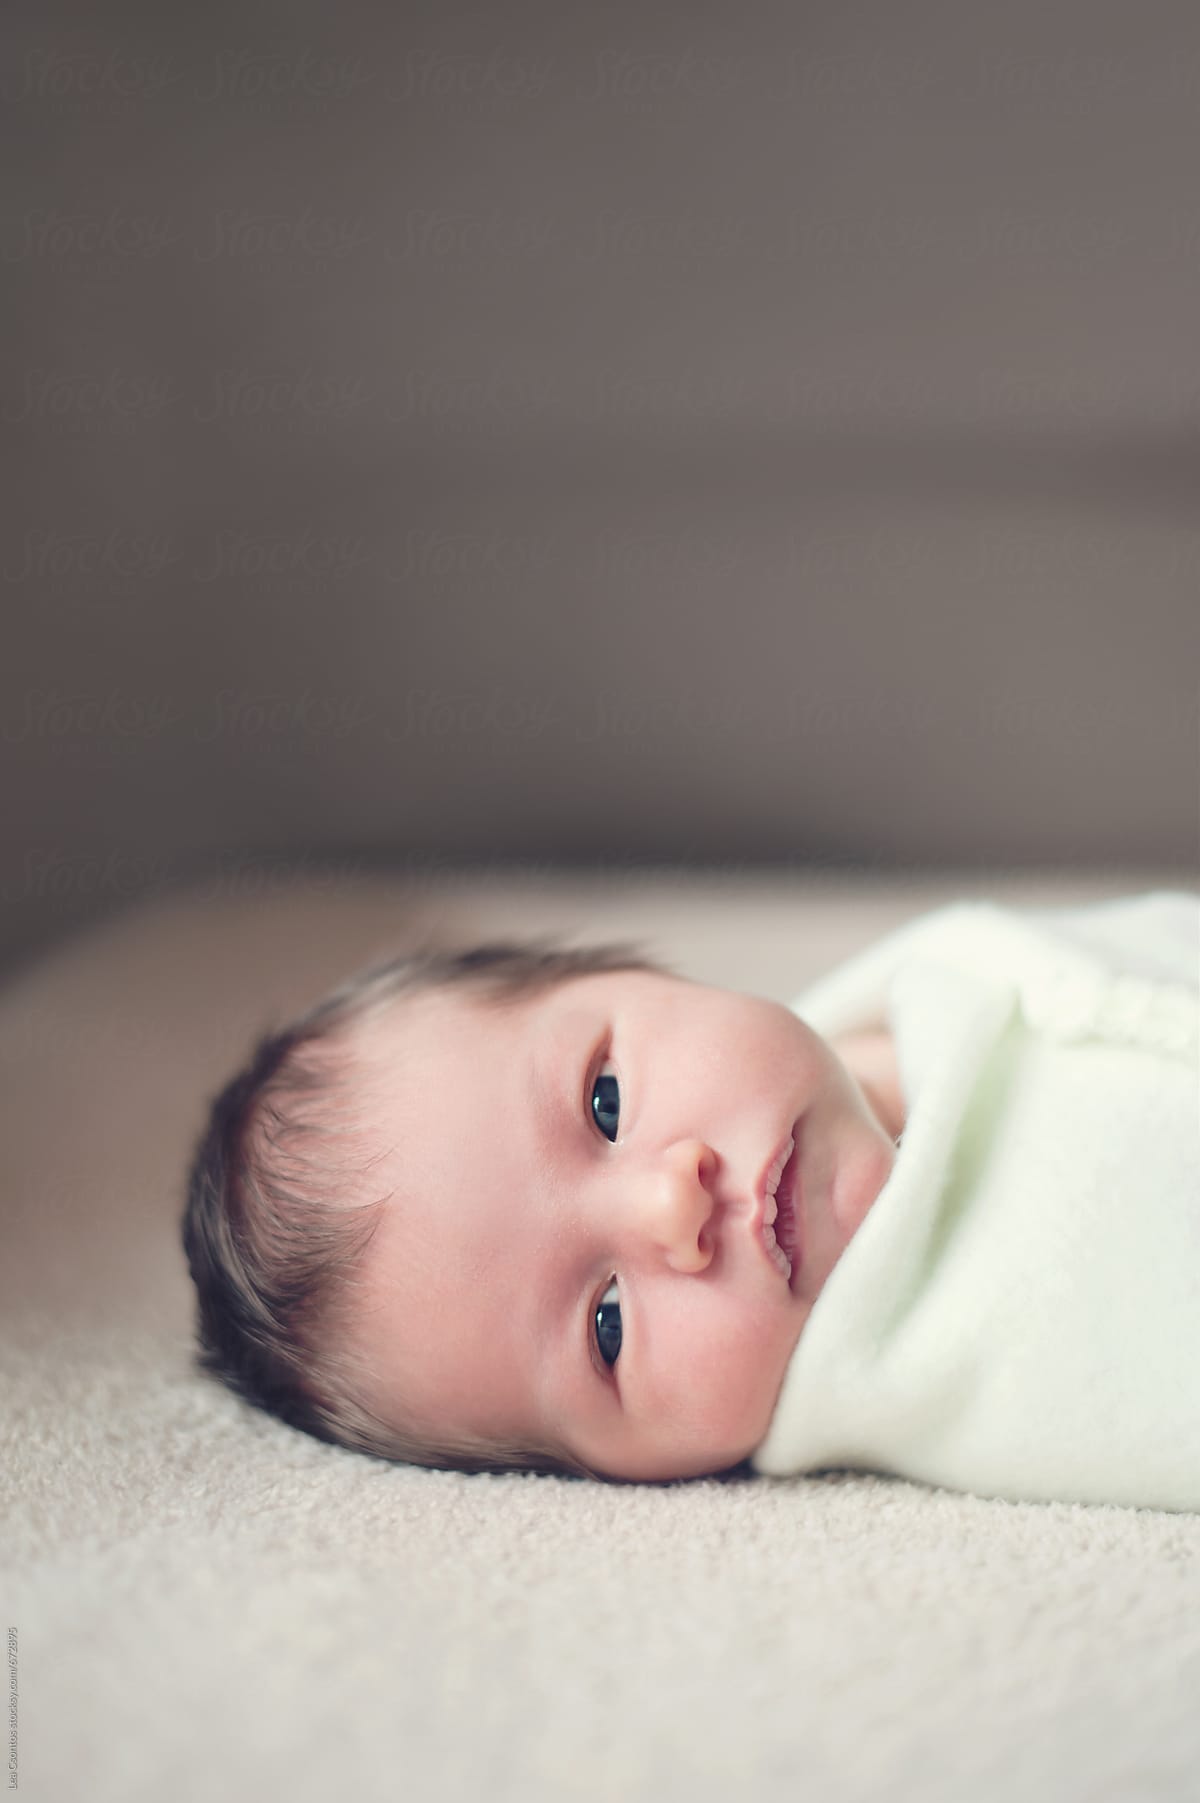 Gorgeous Awake Newborn Baby Wrapped In A Blanket And Looking At Camera